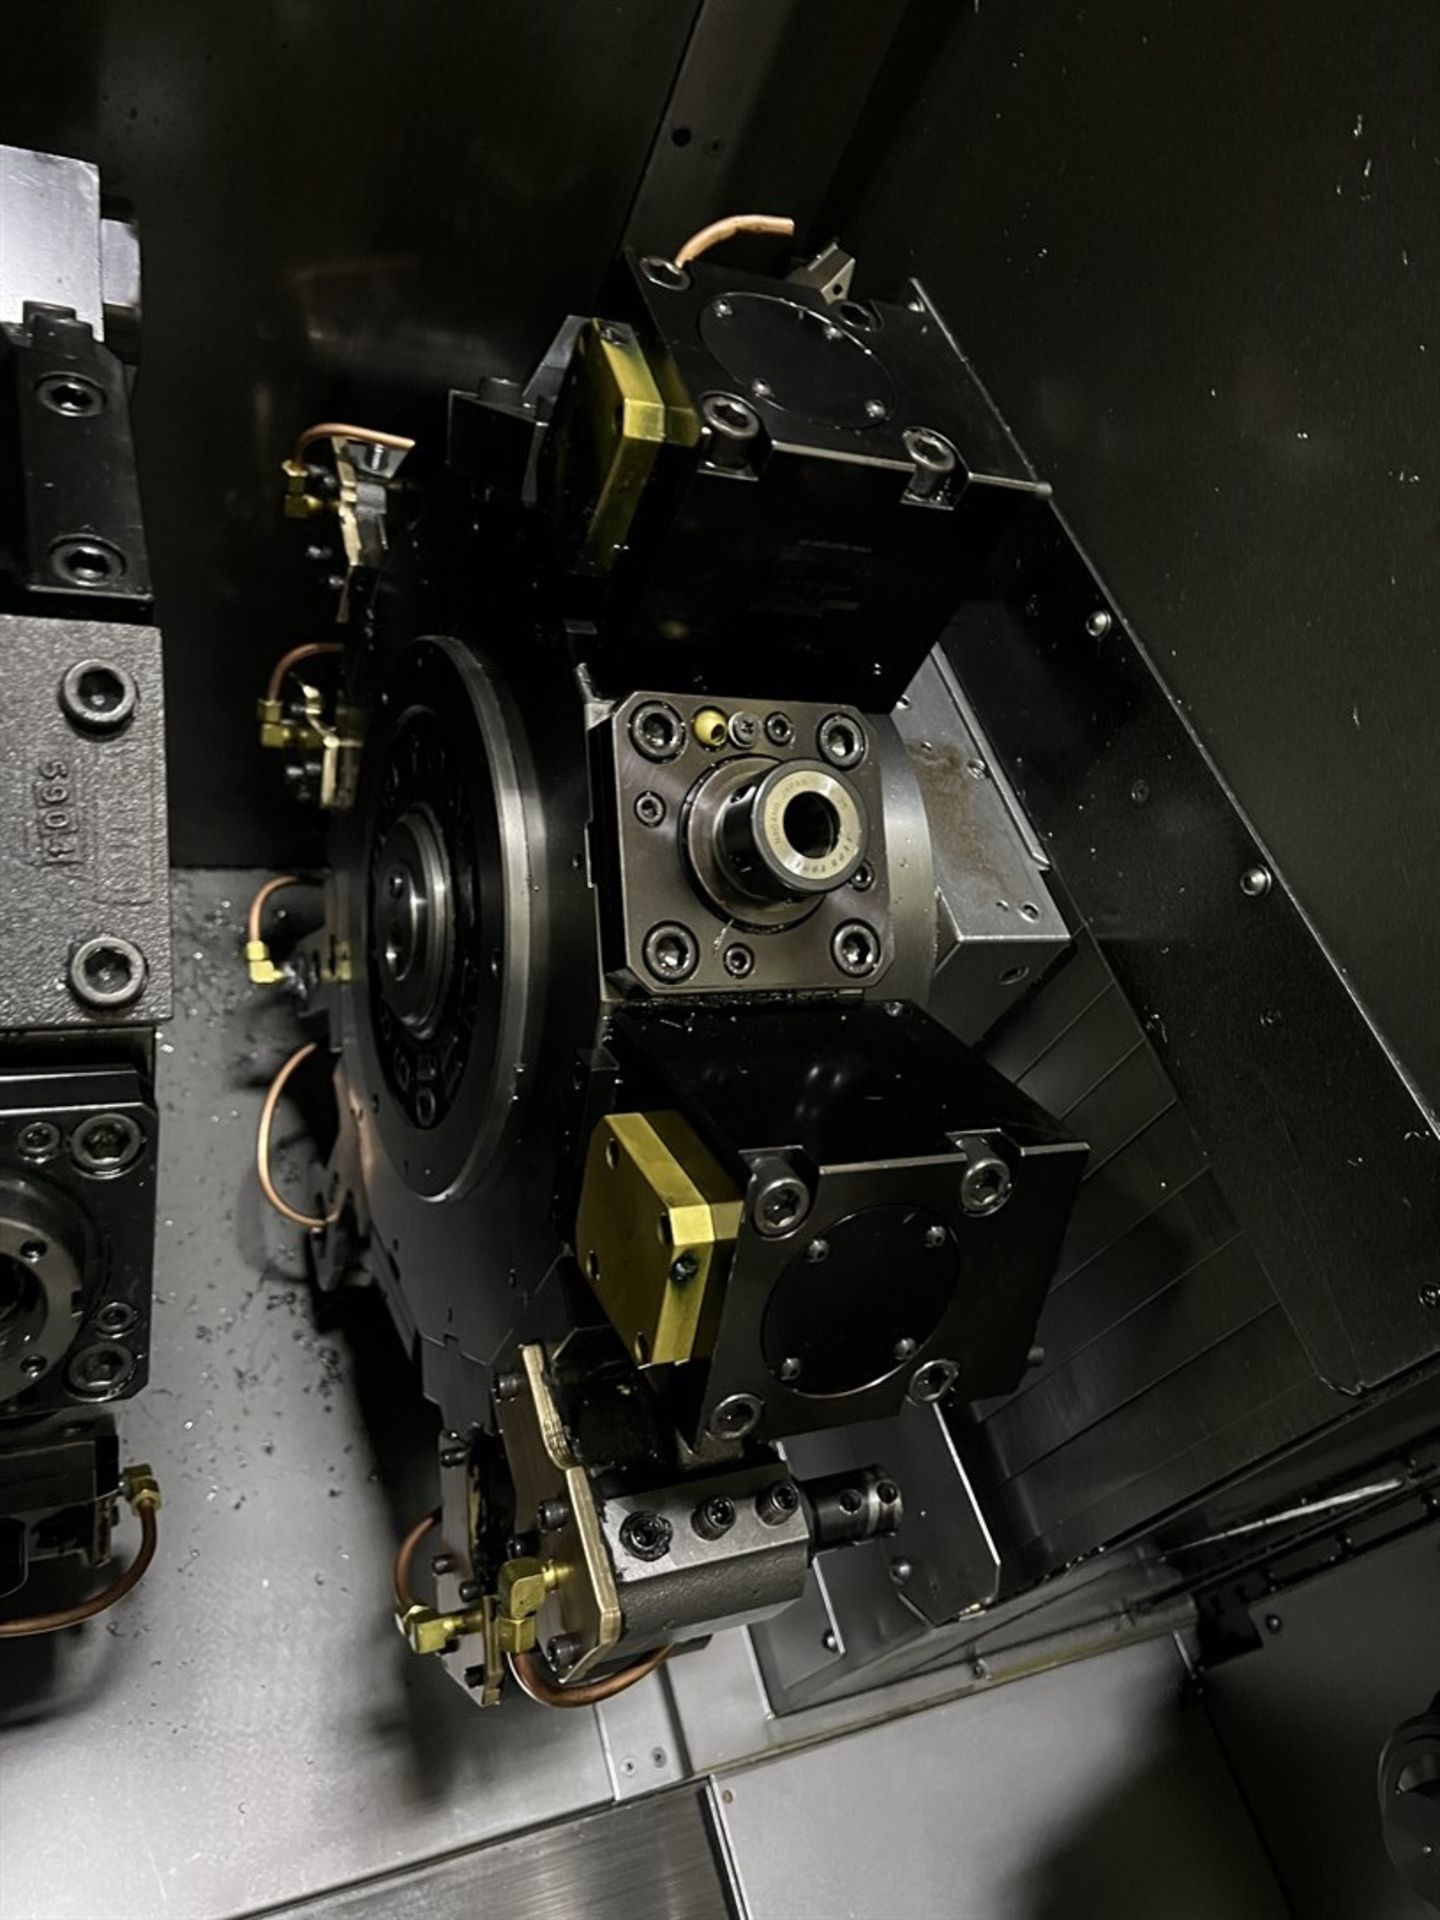 NAKAMURA-TOME TW-20 CNC Opposed Spindle Turning Center, s/n (2), Nakamura-Tome LUCK-BEI Controls, - Image 6 of 11